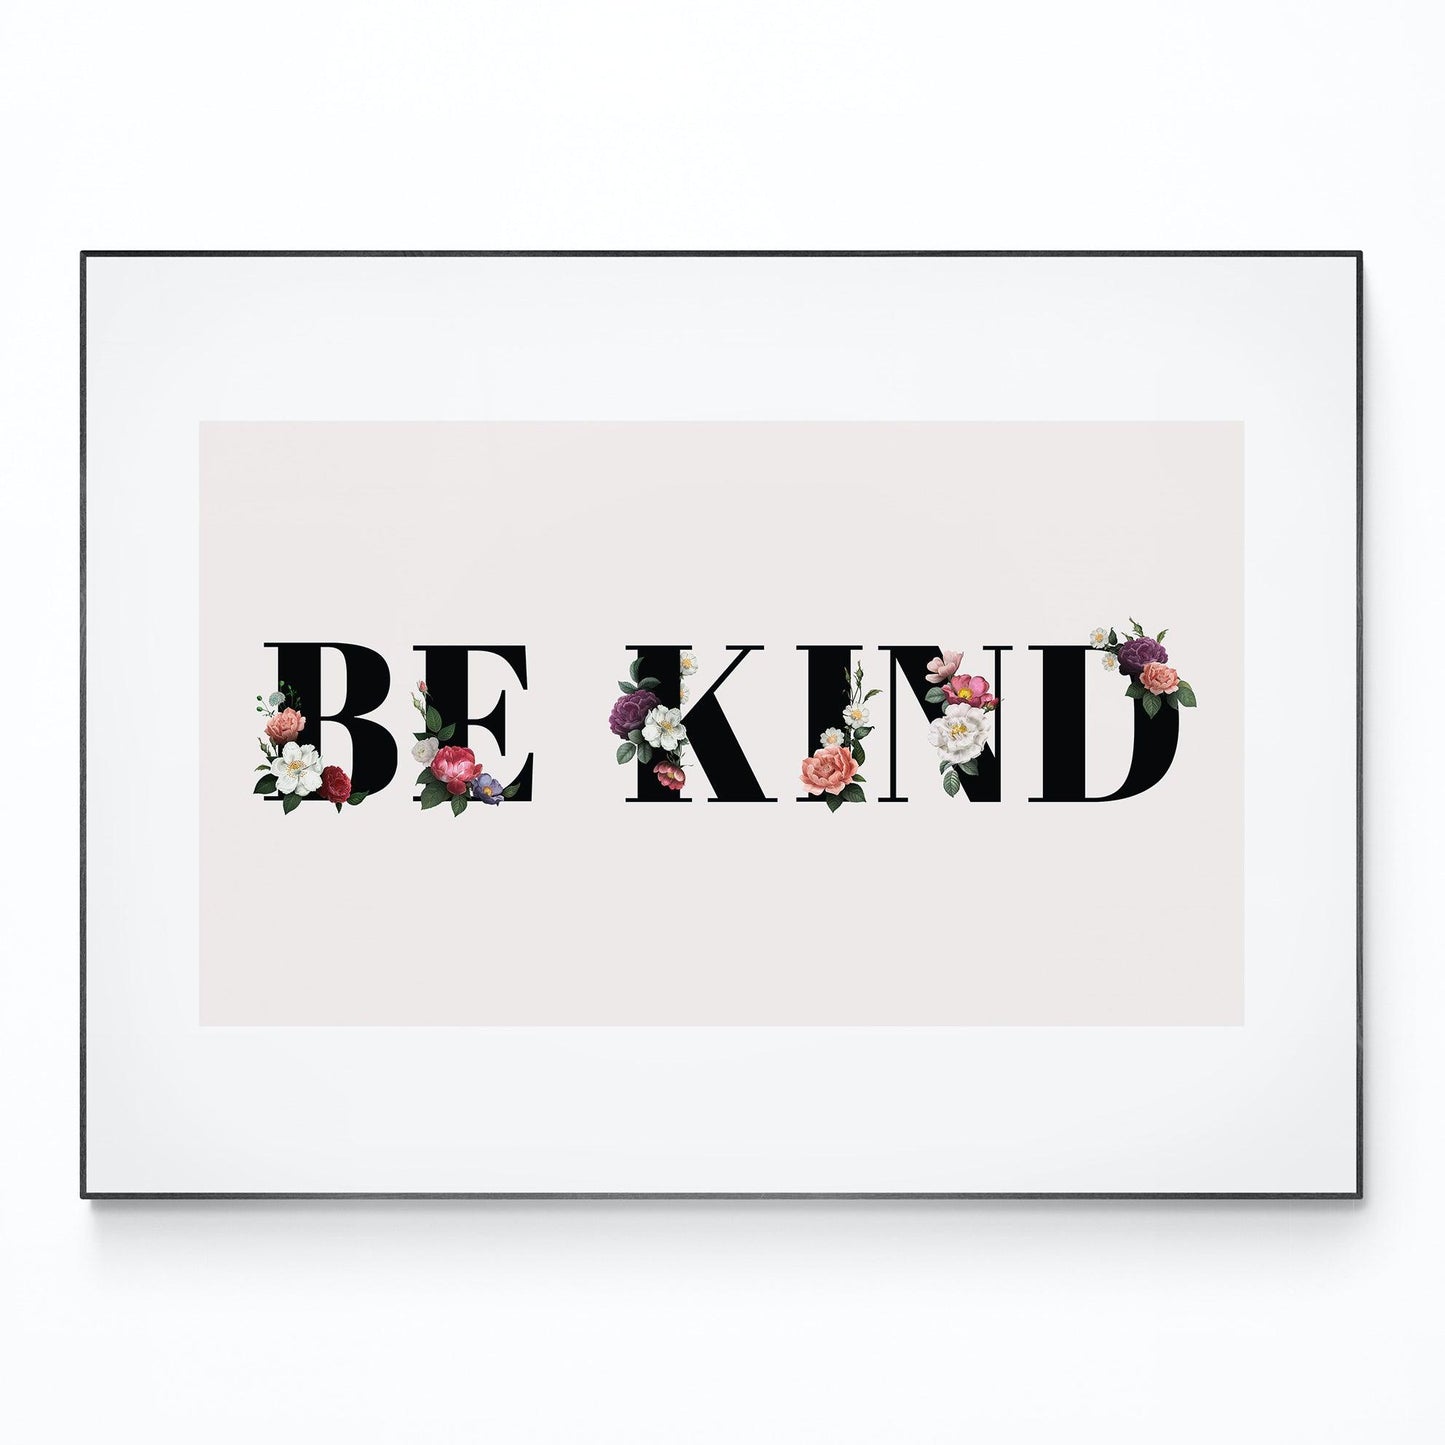 Be Kind Motivational Quote Print - 98types